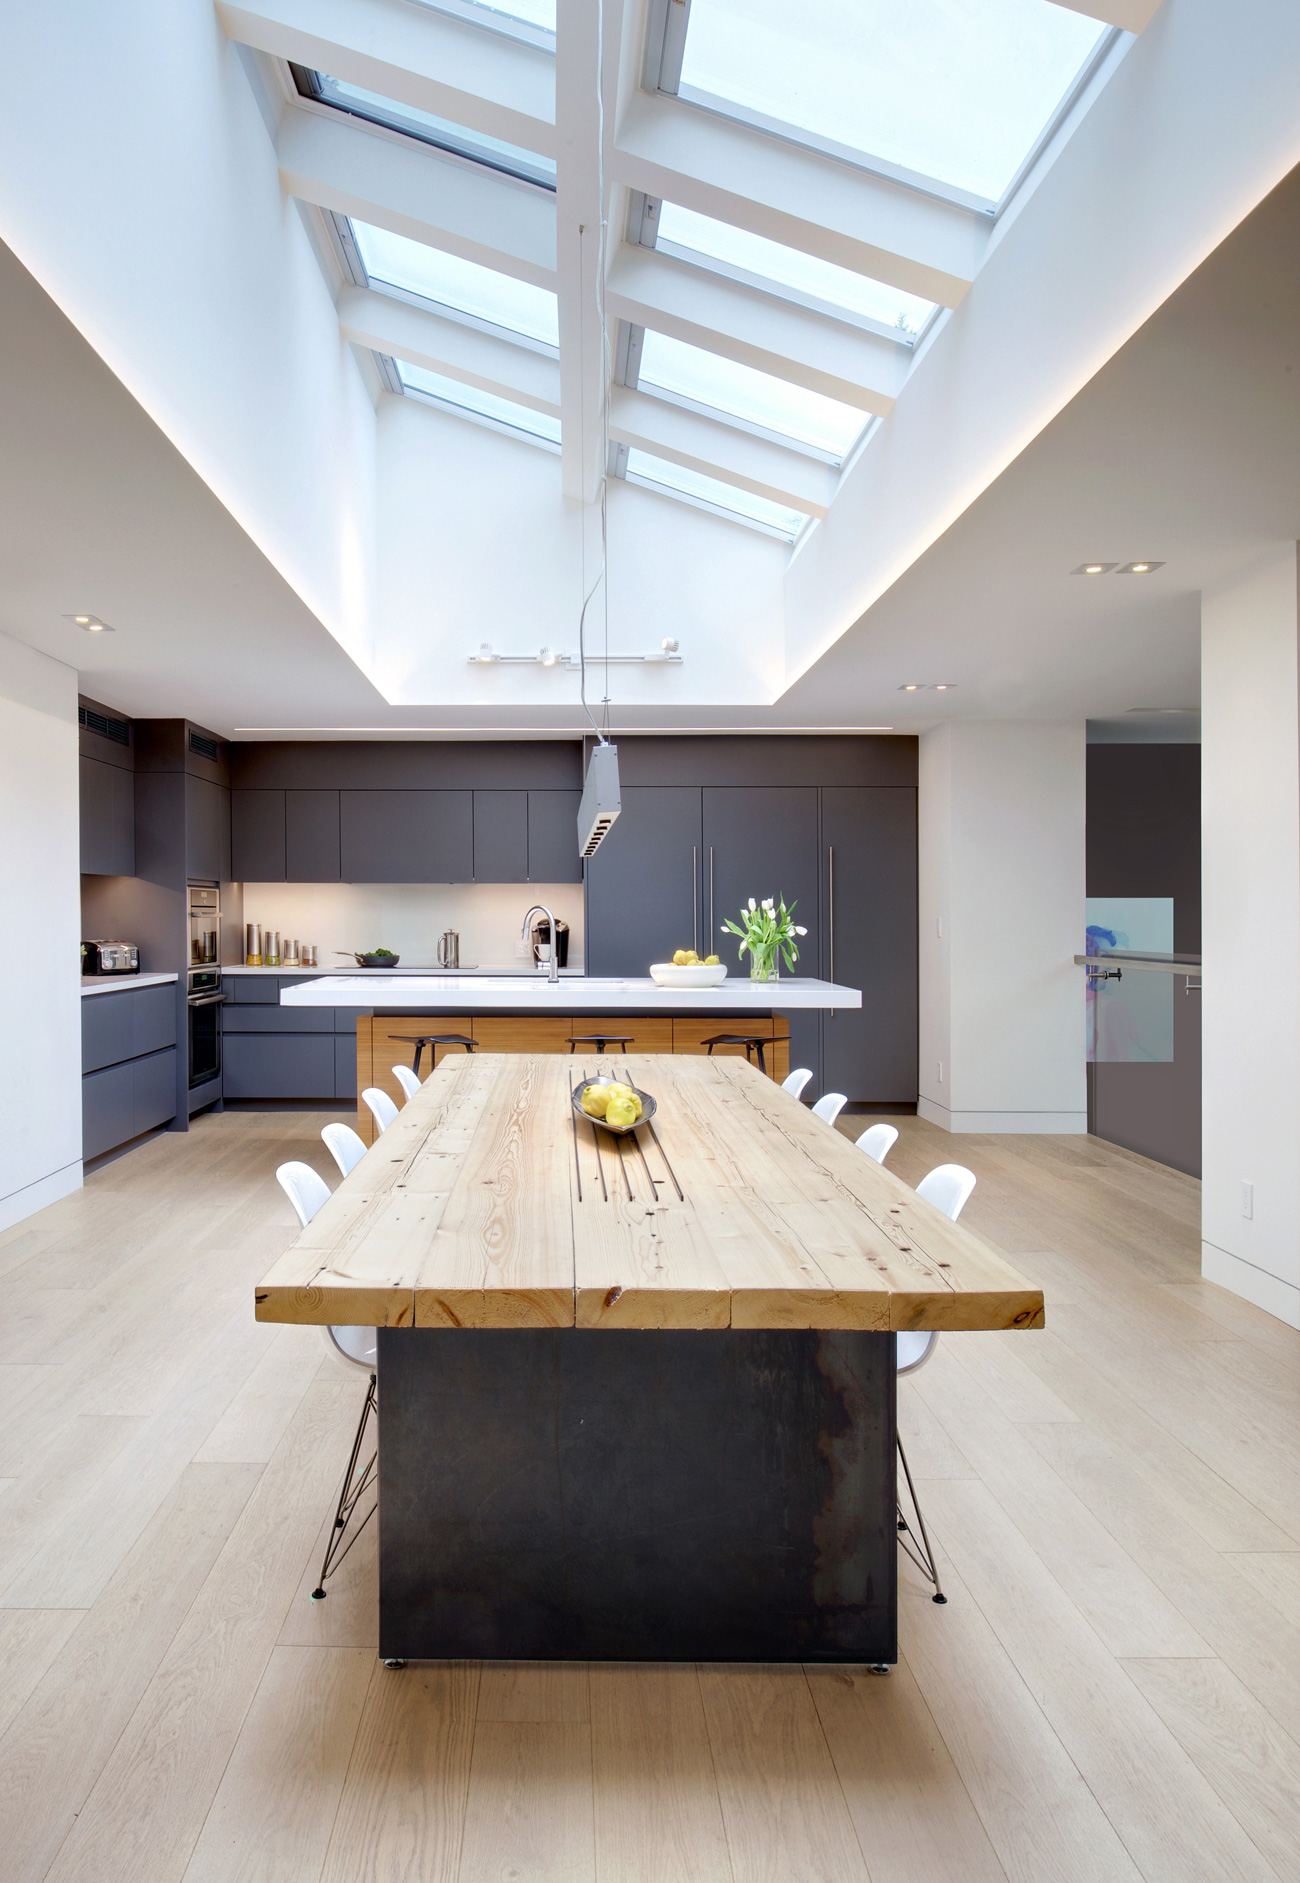 Skylights by Velux brighten the kitchen that overlooks the stage. Table and millwork by Luis Dos Santos Sousa.